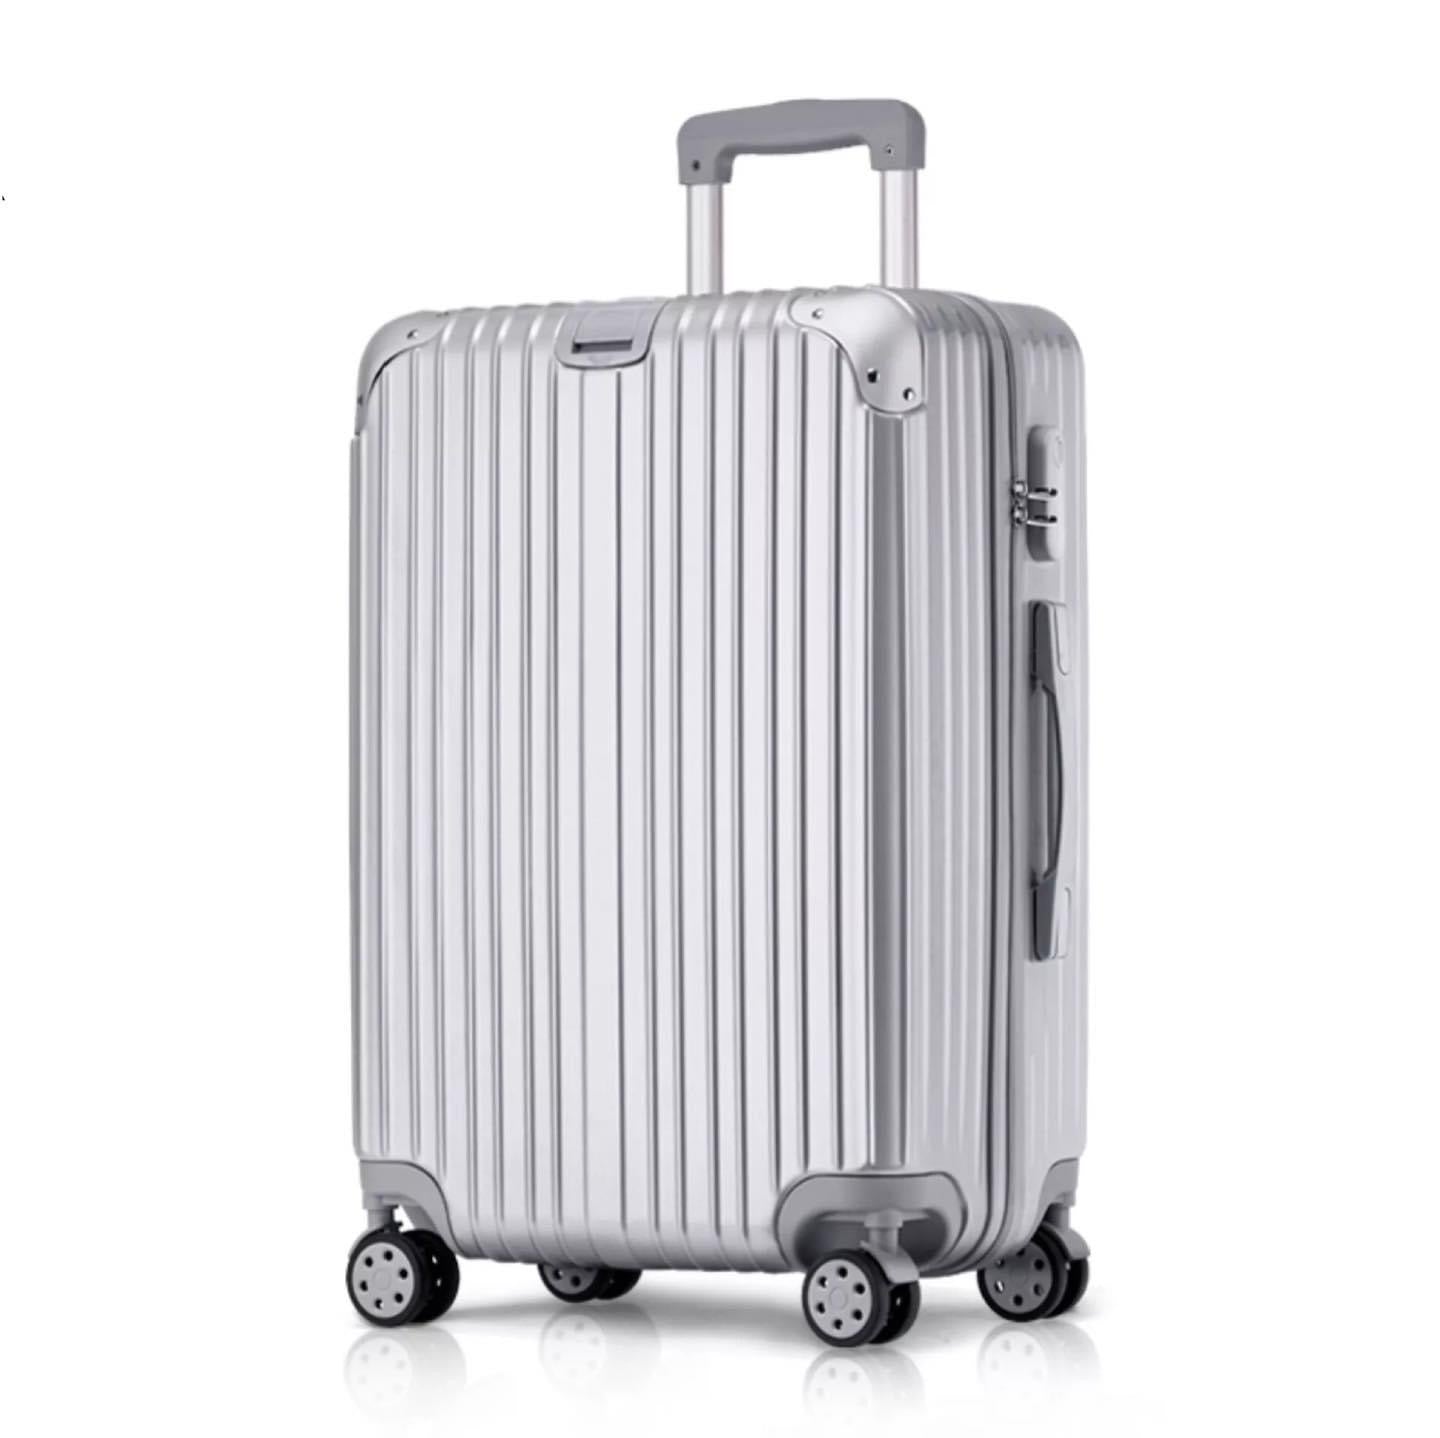 28" Silver Colour Aluminium Framed Hard Shell Without Zipper TSA Luggage With Spinner Wheel